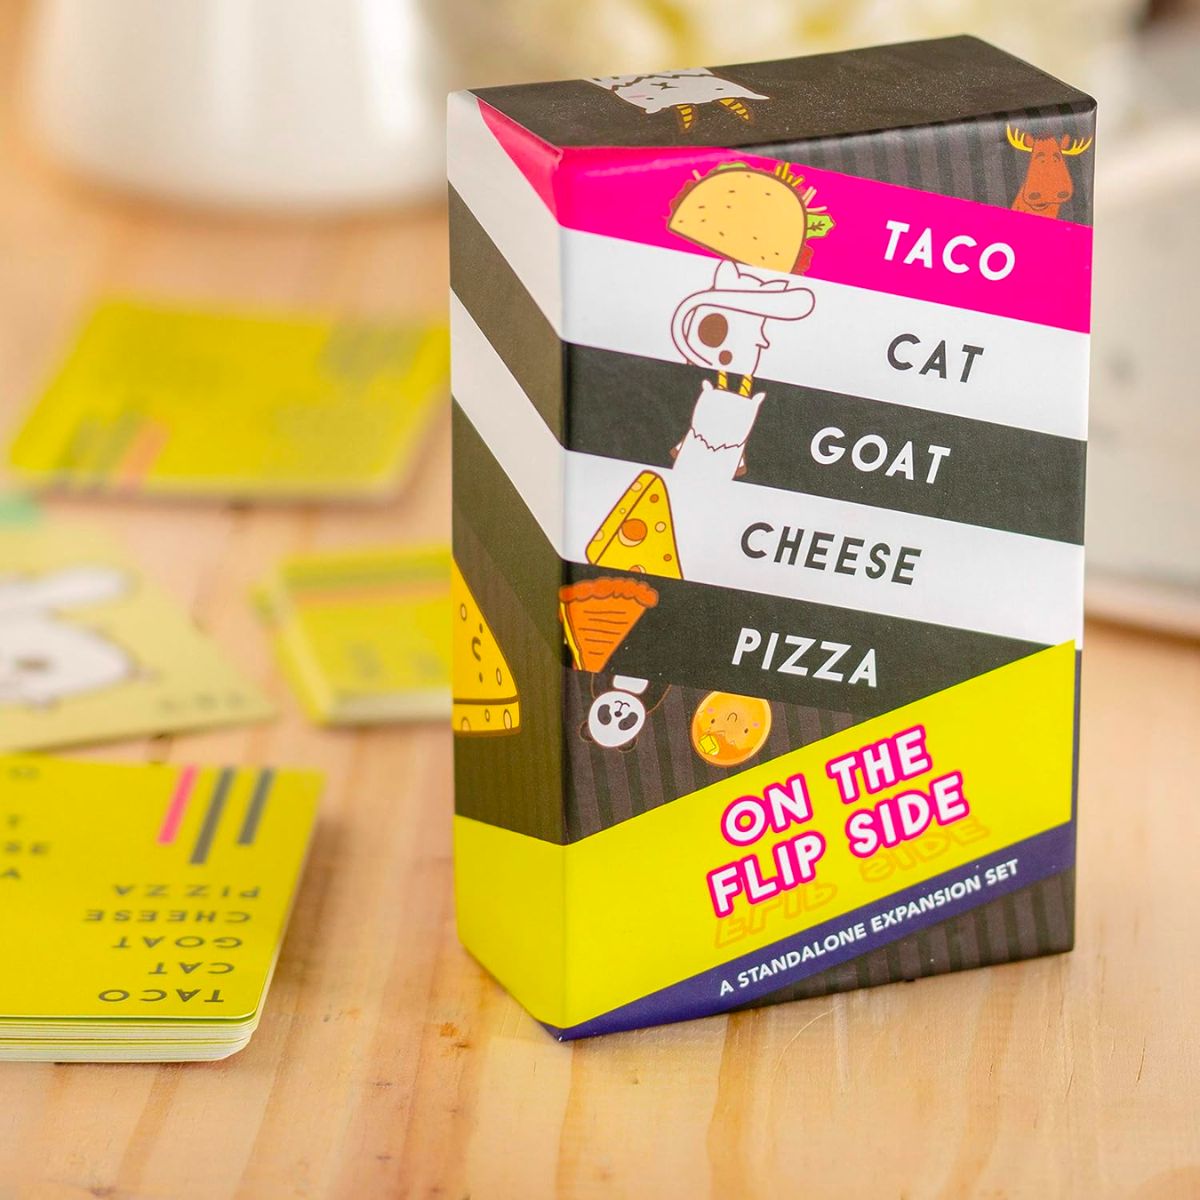 taco cat goat cheese pizza on the flip side card box and cards on a table